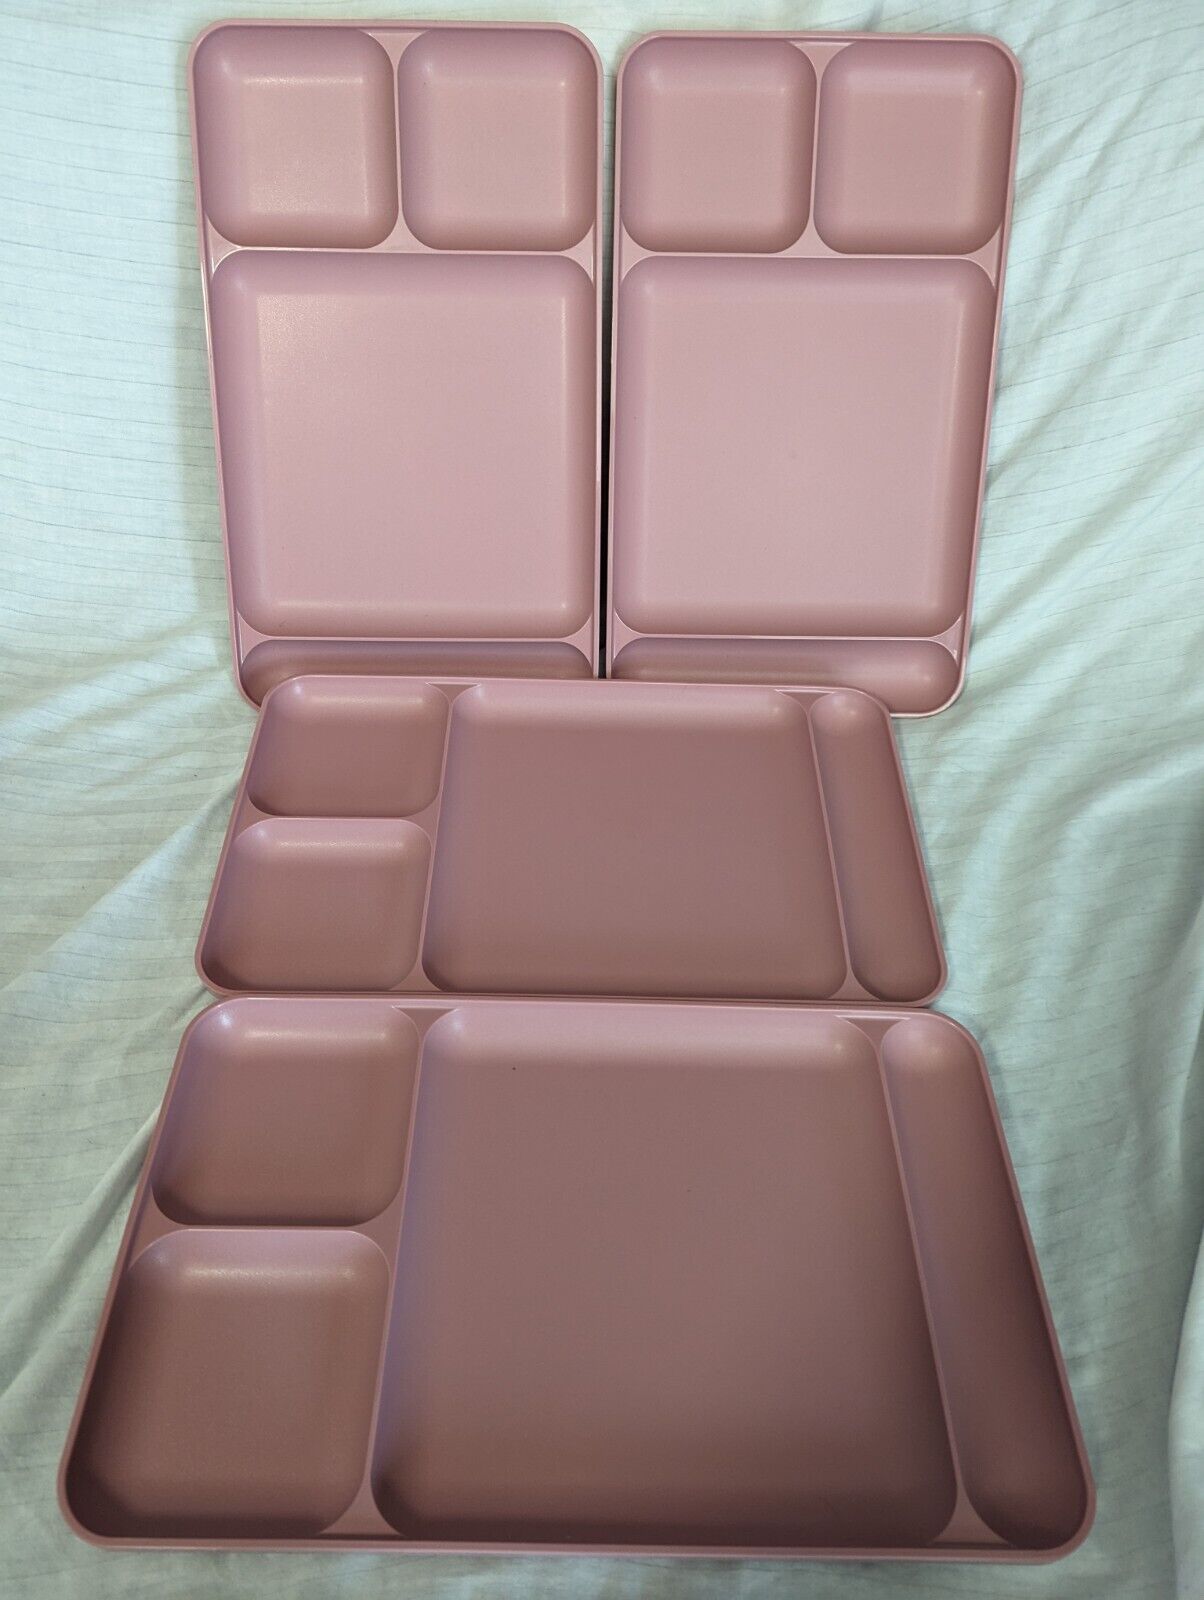 Set of 4 Vintage Tupperware Pink Lavender Divided Trays. Open Box